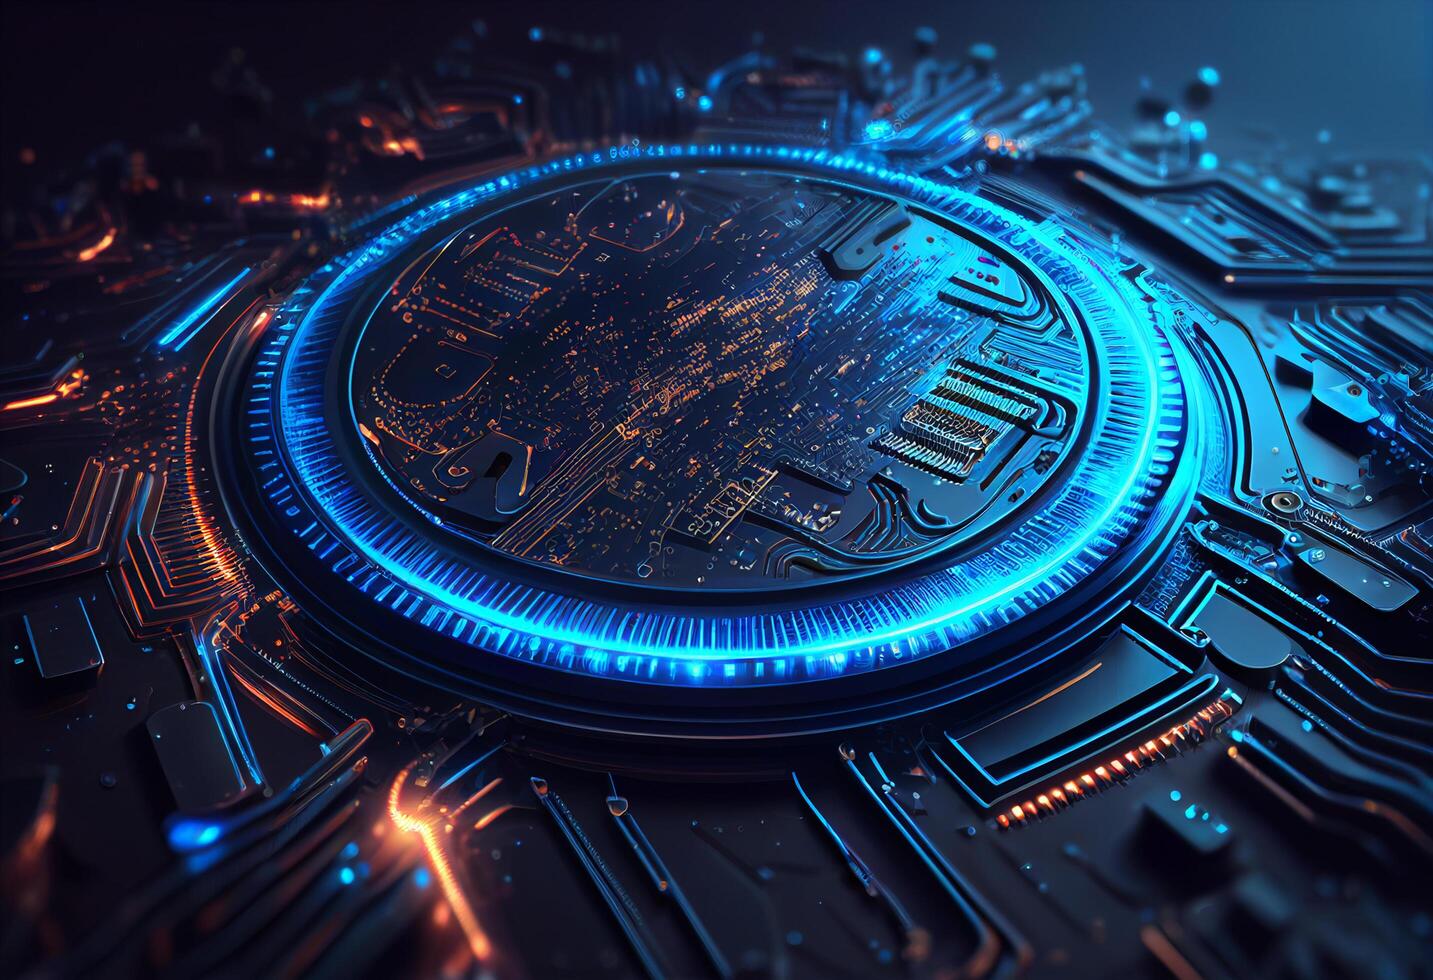 Circuit board futuristic technology background. blue 3d rendering toned image photo